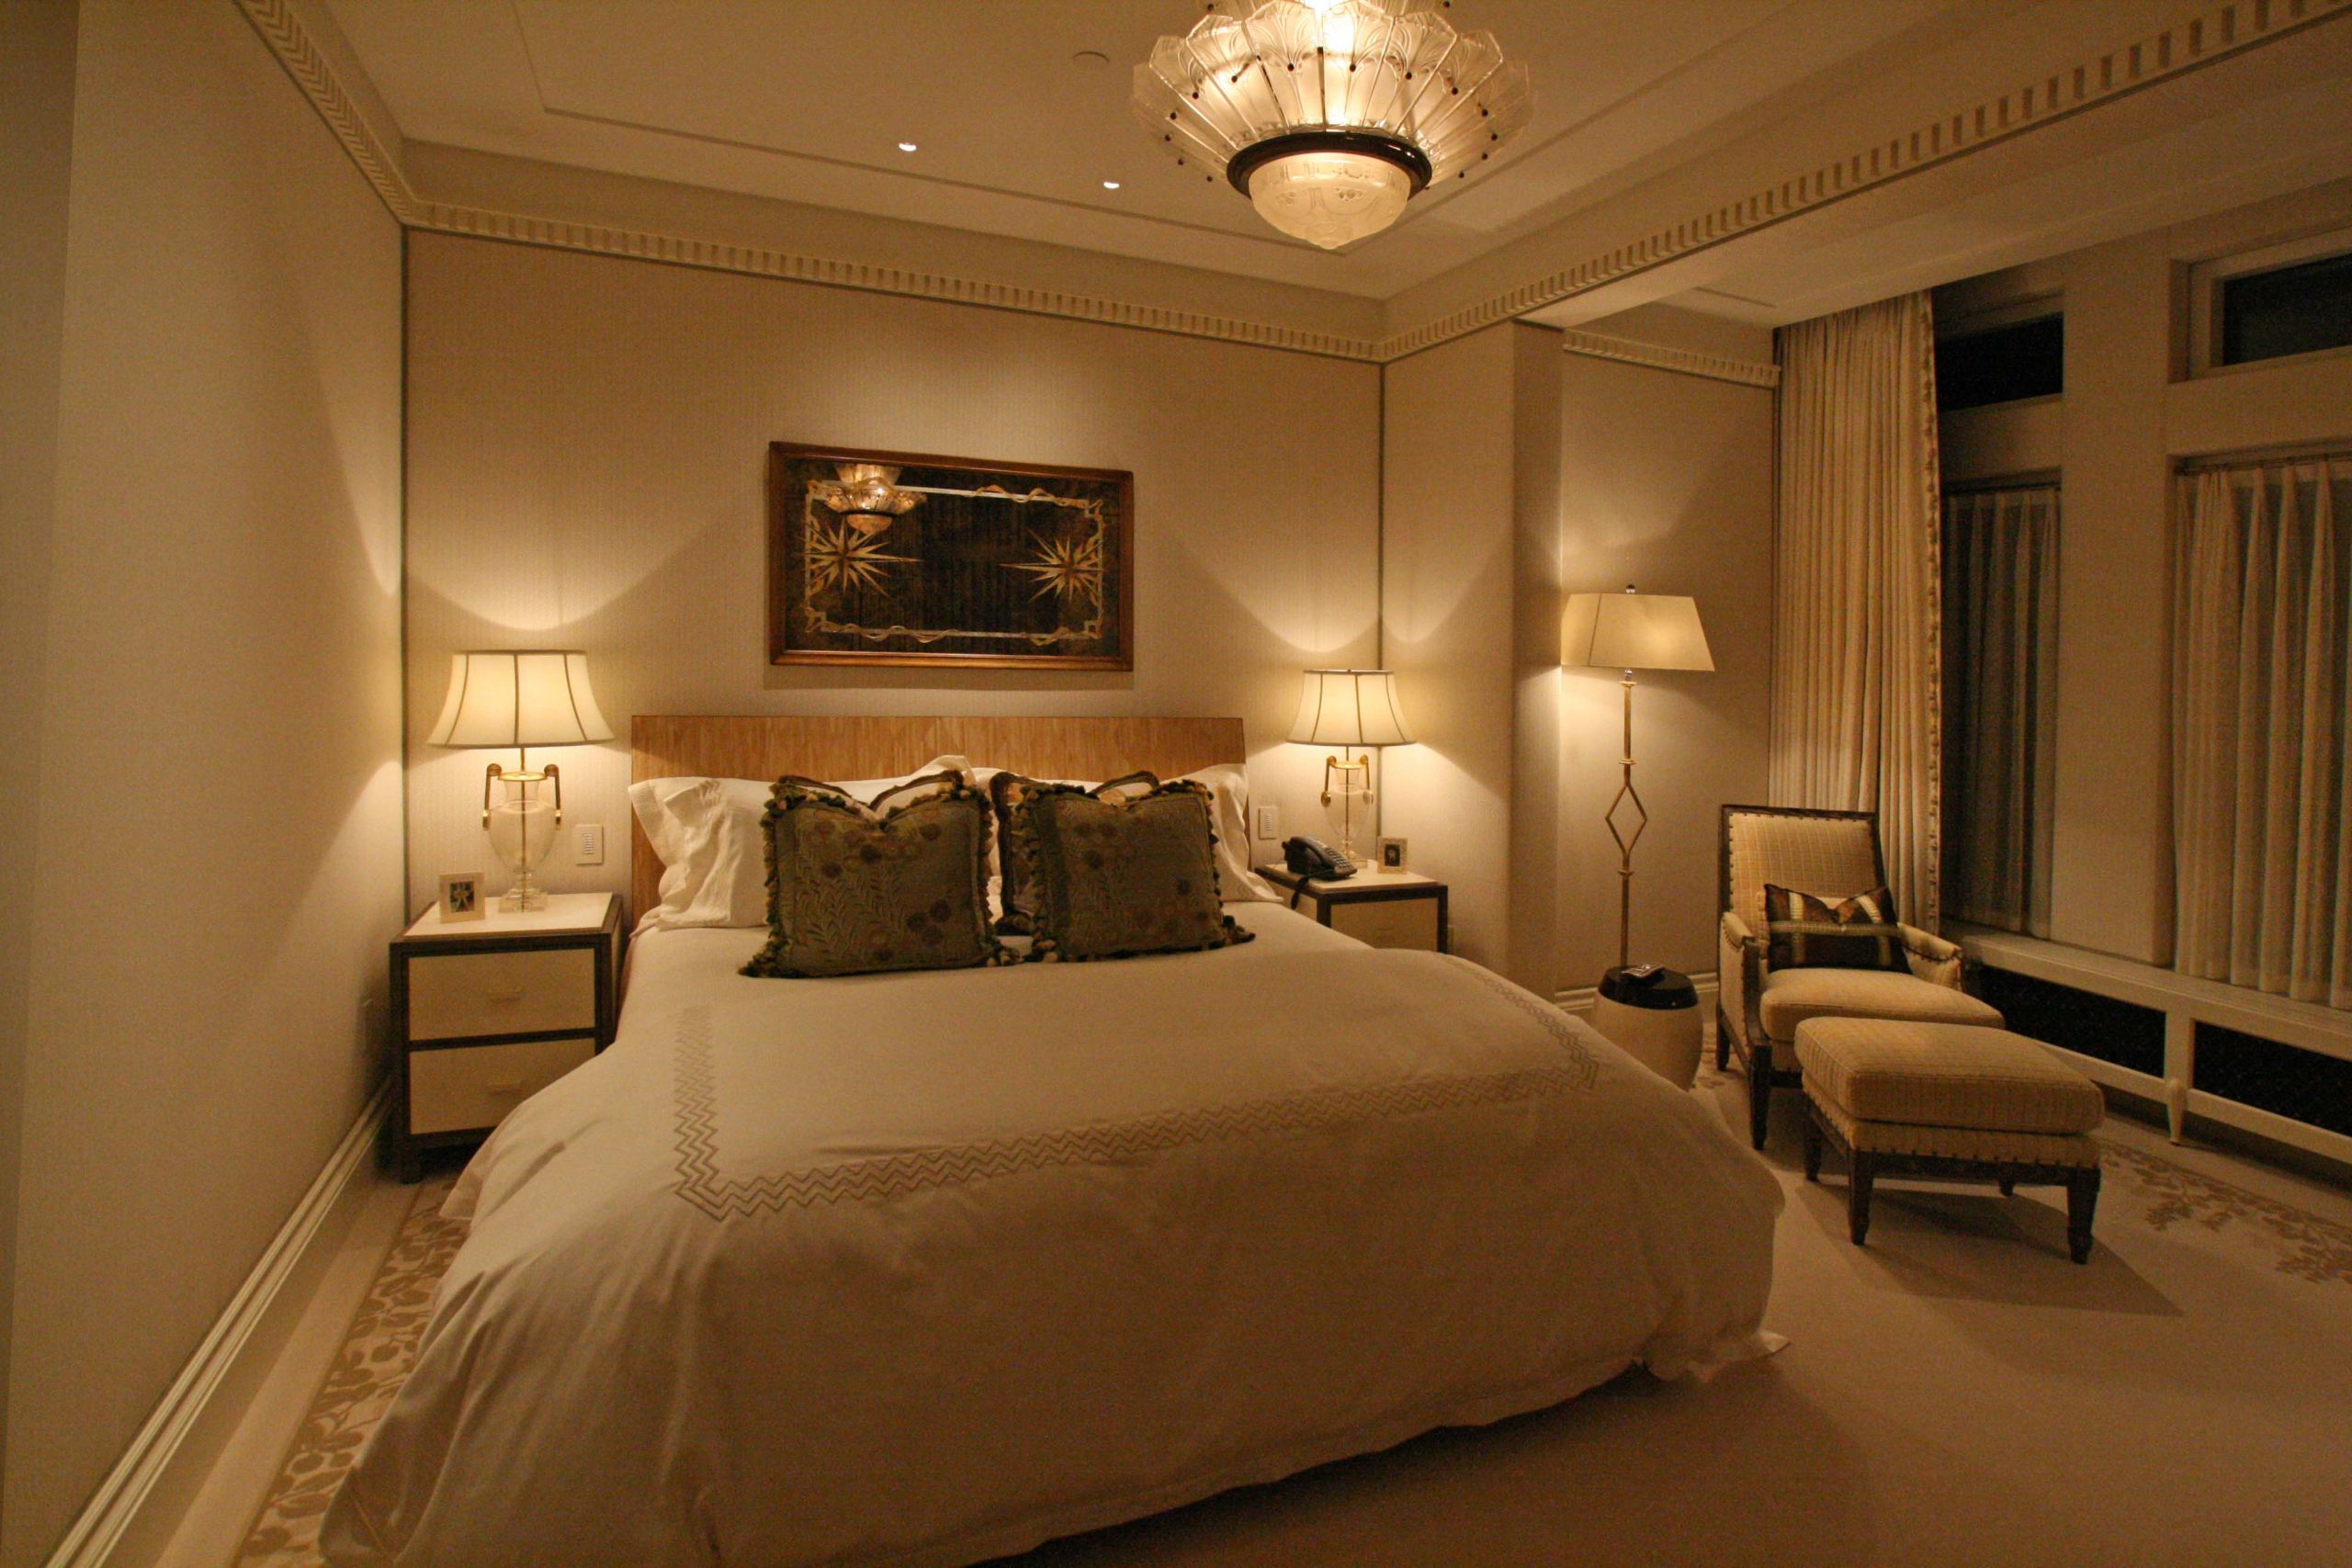 Best Lightbulbs For Bedroom
 Here are the Best Lights that Create a Warm & Cosy Bedroom